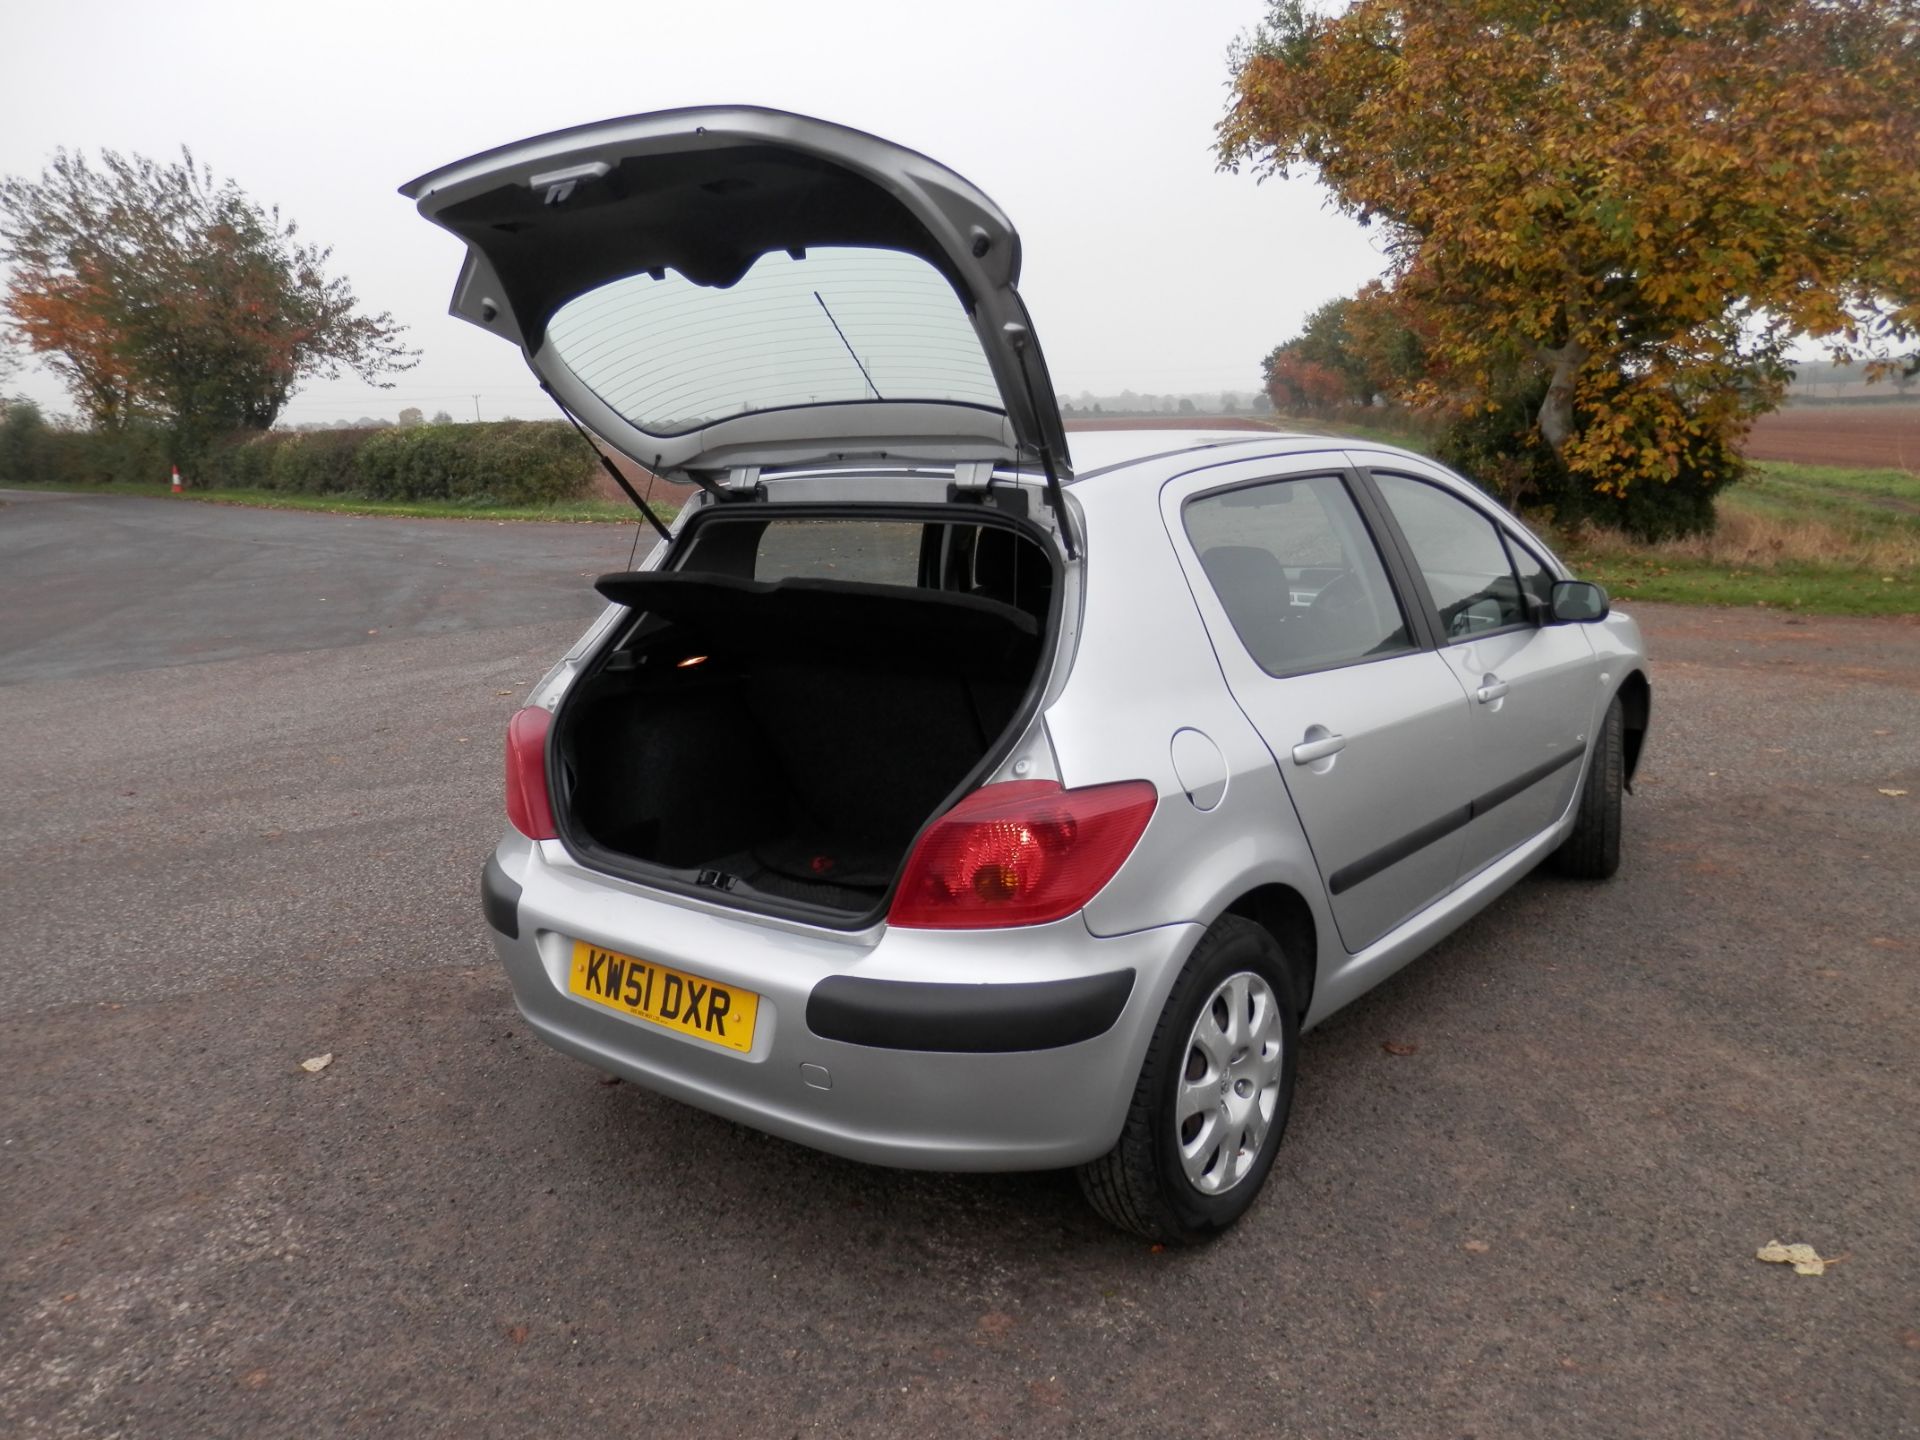 2002/51 PLATE PEUGEOT 307 1.6 LX AUTOMATIC, ONLY 51K WARRANTED MILES & MOT MAY 2017, GREAT CAR. - Image 9 of 22